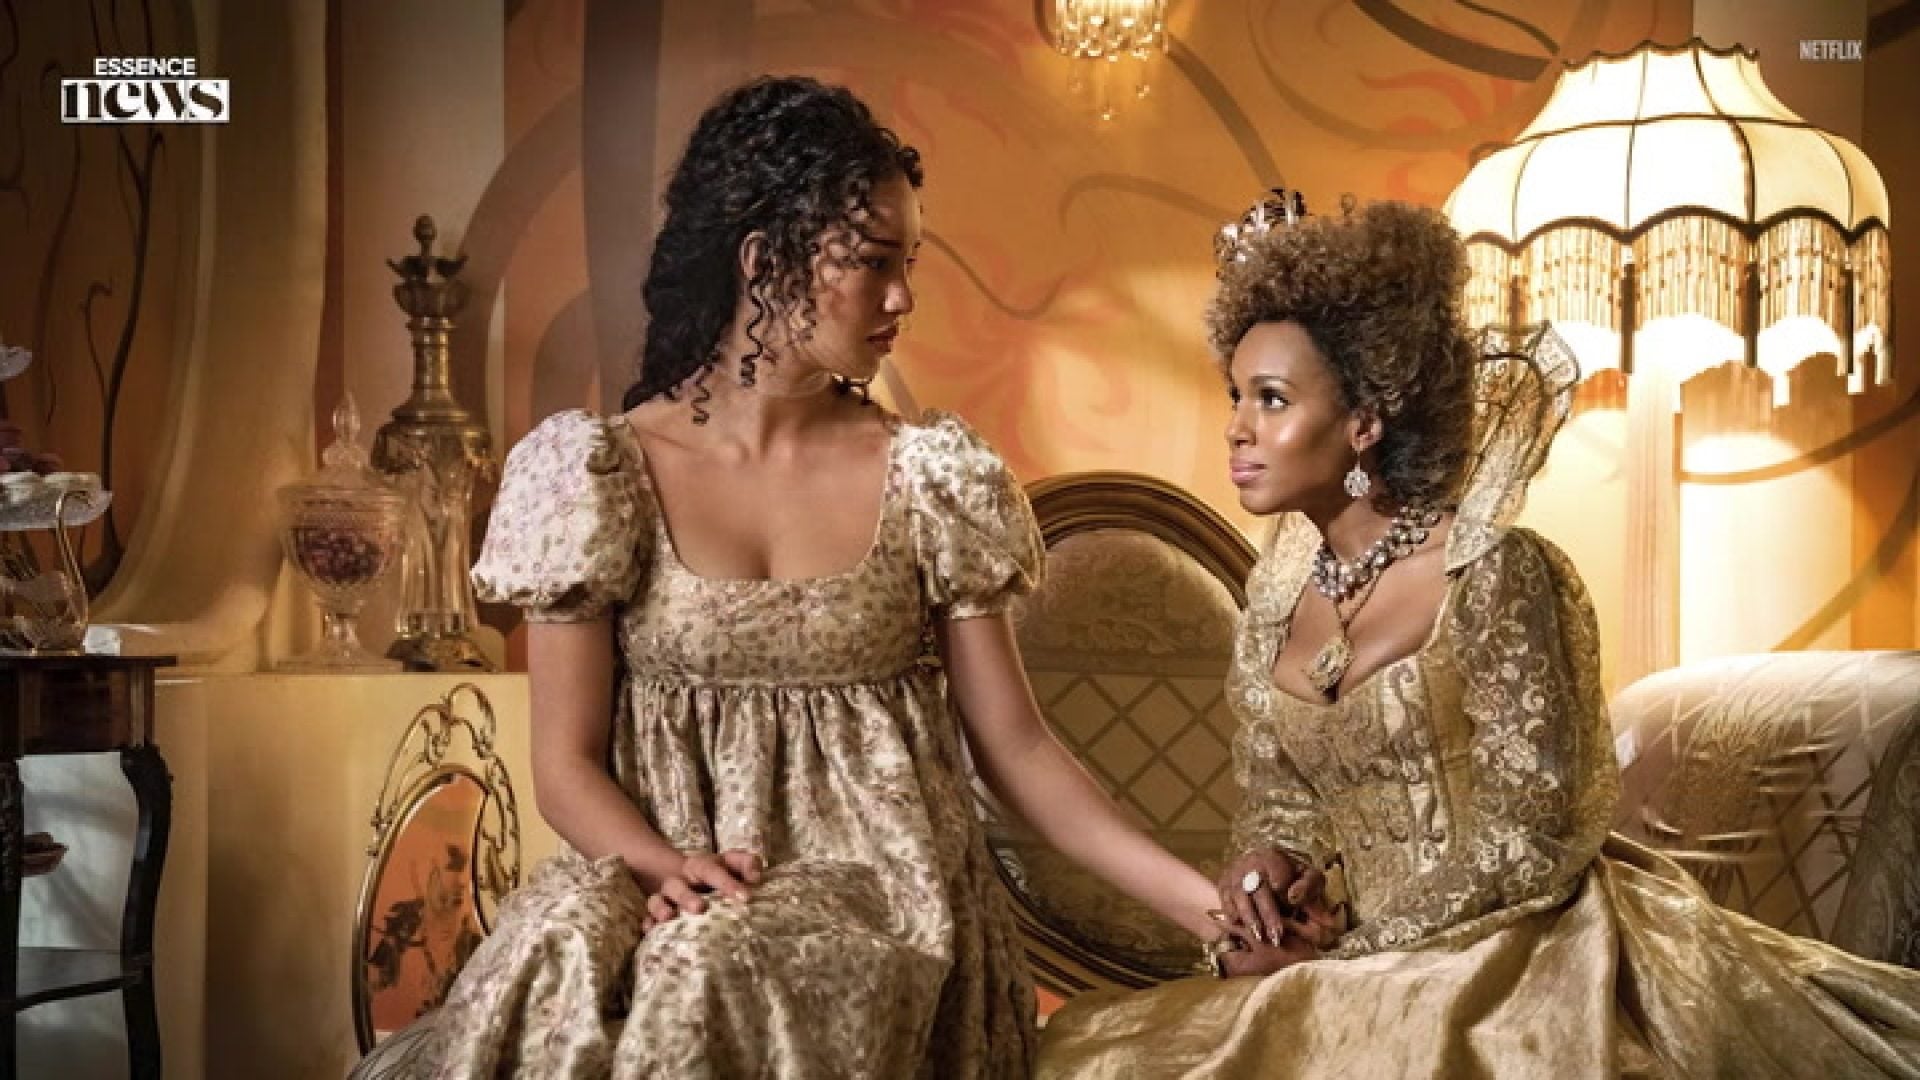 WATCH | Kerry Washington And Charlize Theron Share Their Takeaways From ‘The School For Good And Evil’